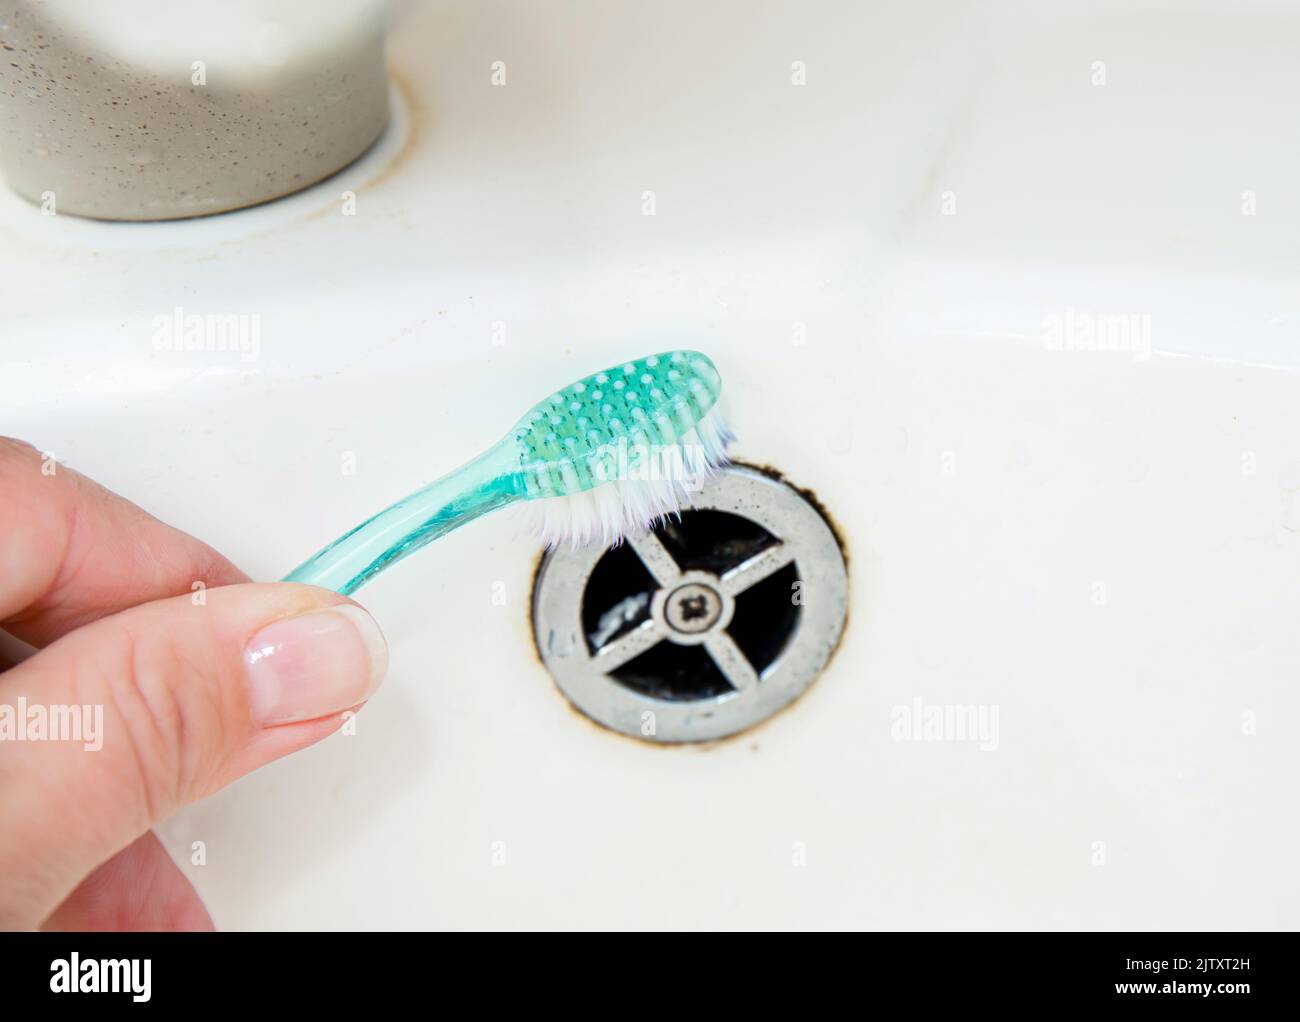 Close up view of woman hand cleaning bathroom sink with toothbrush. Home cleaning hack, fits small spaces to clean off mould and dirt. Stock Photo